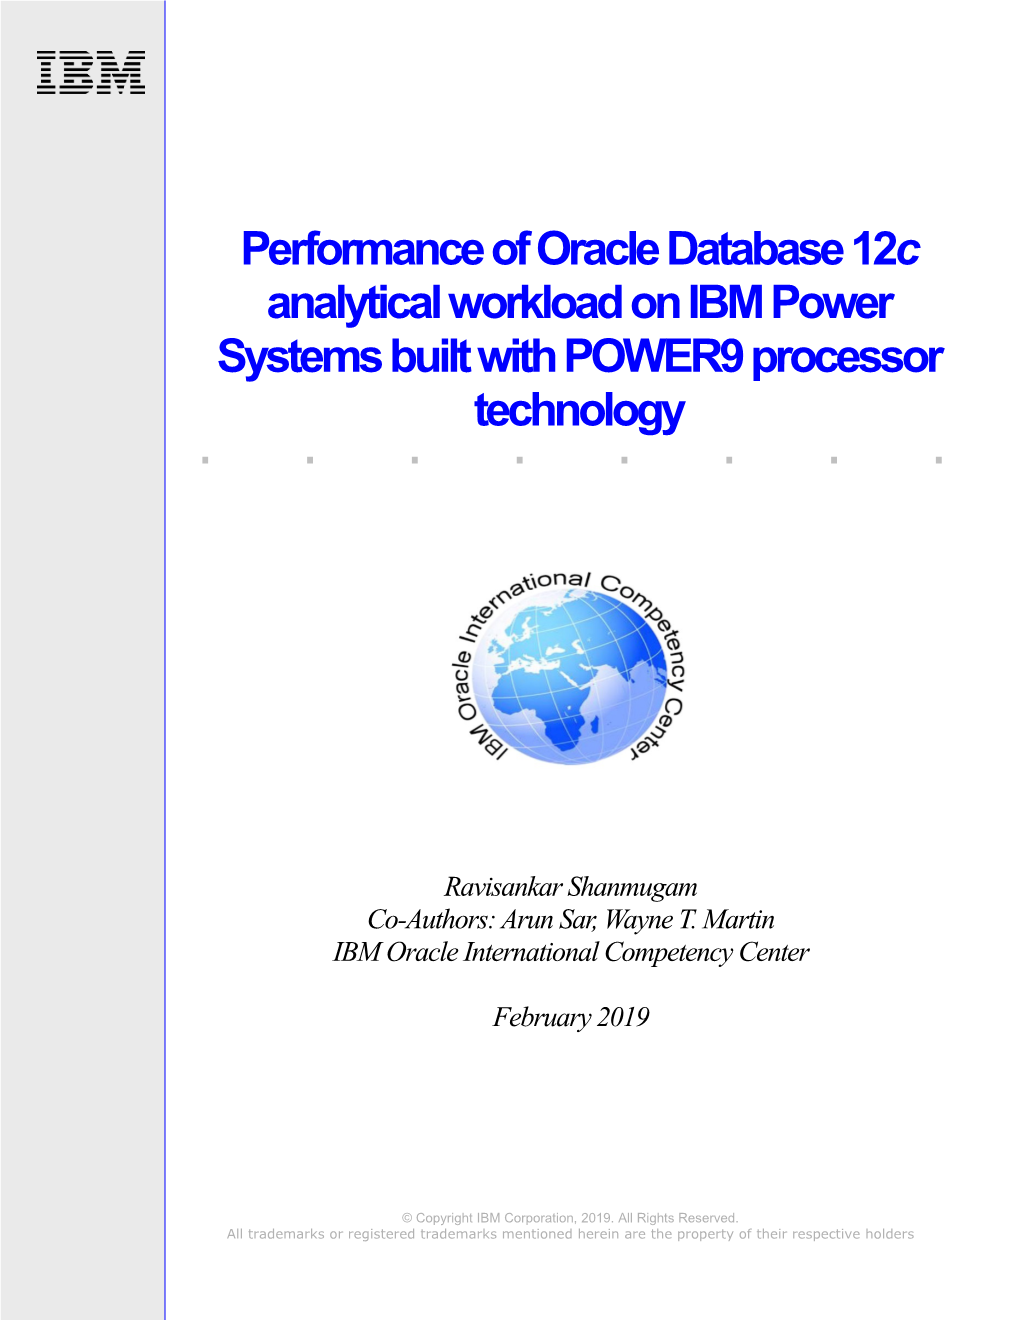 Performance of Oracle Database 12C Analytical Workload on IBM Power Systems Built with POWER9 Processor Technology